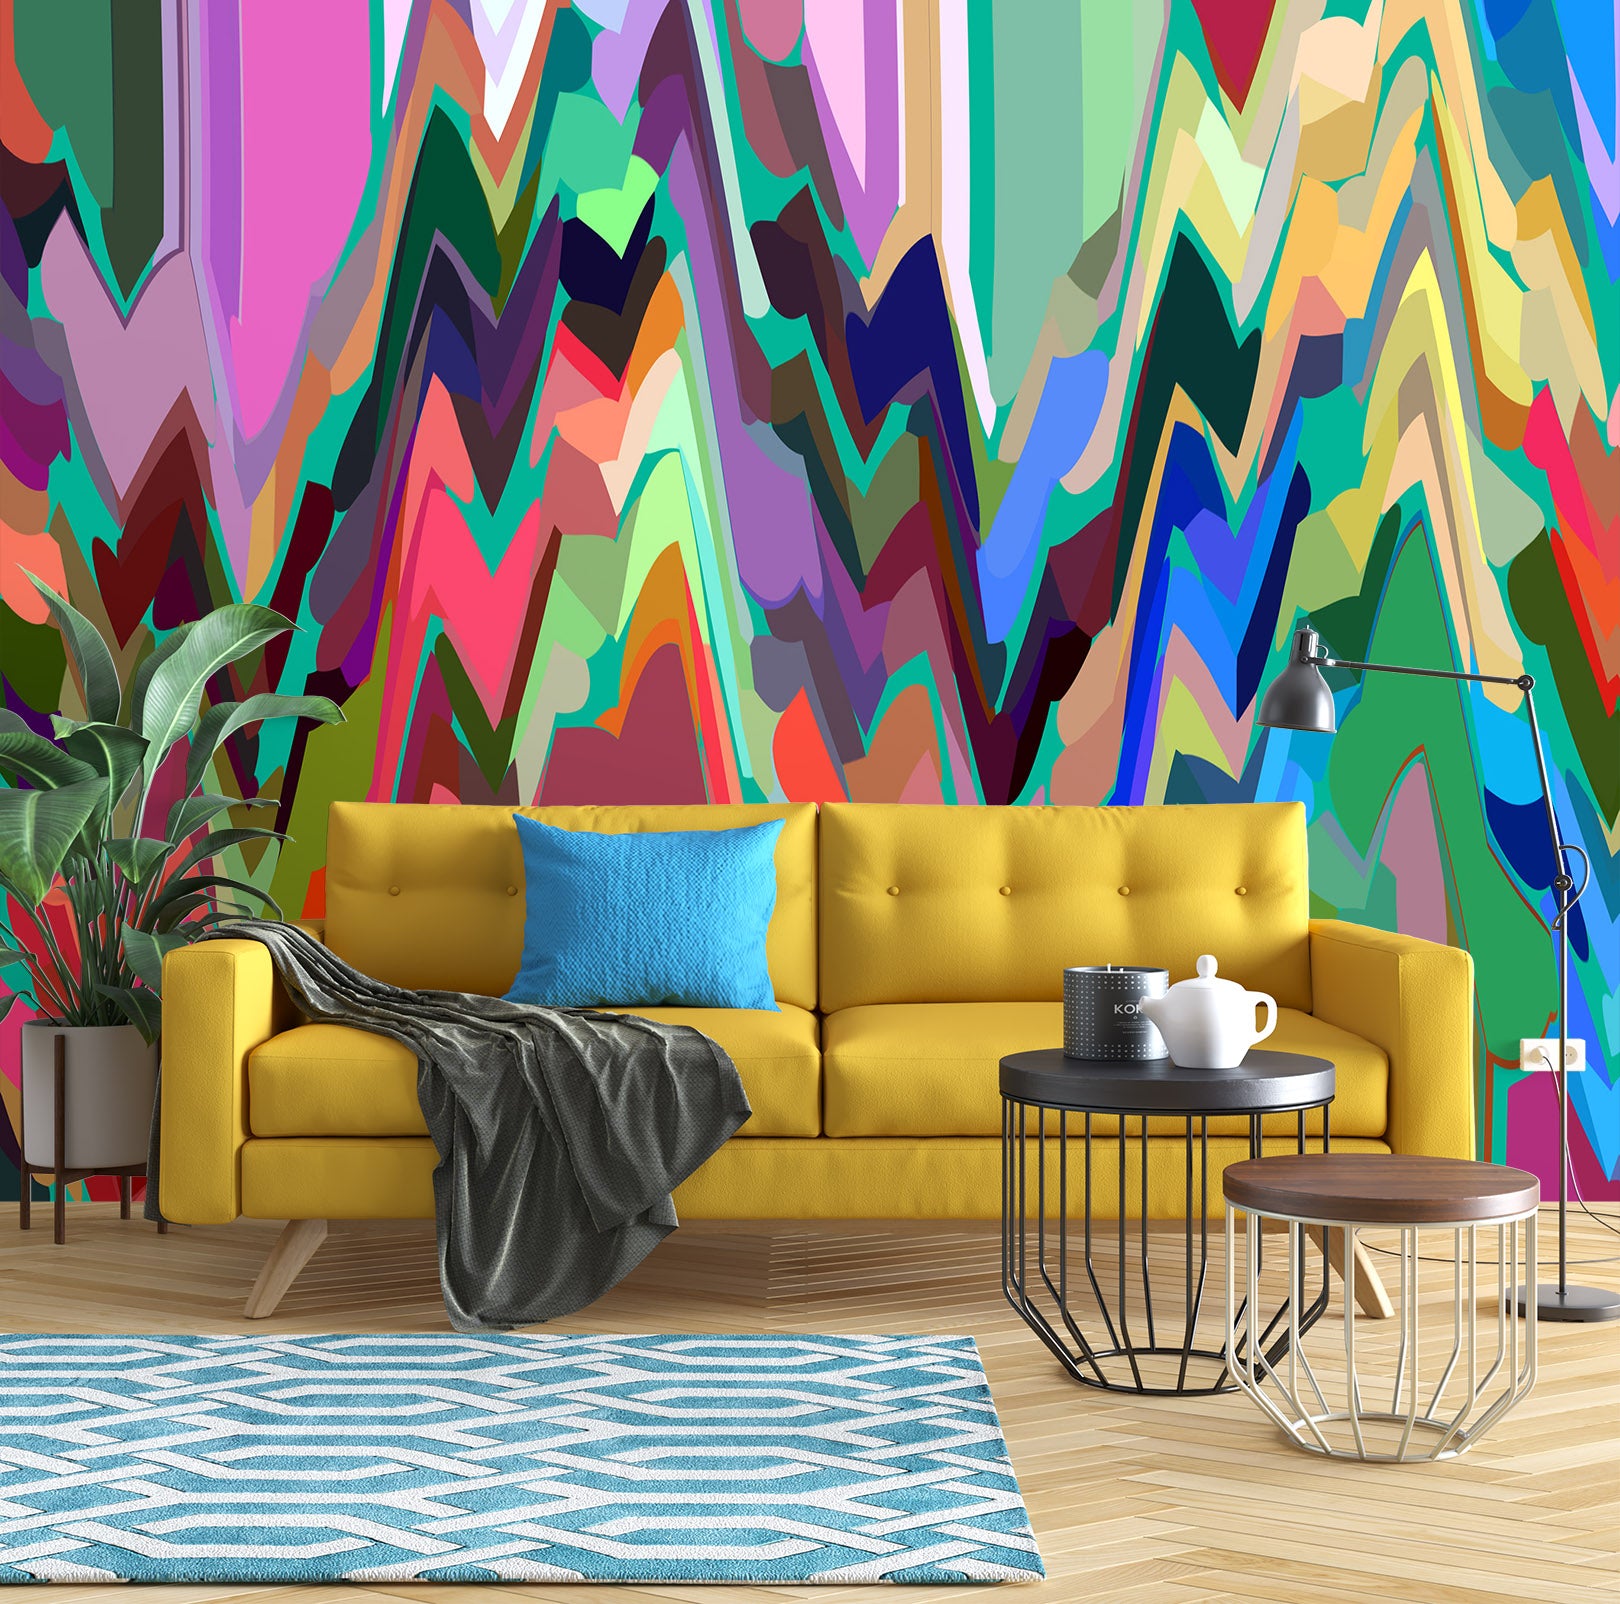 3D Colored Trees 71090 Shandra Smith Wall Mural Wall Murals